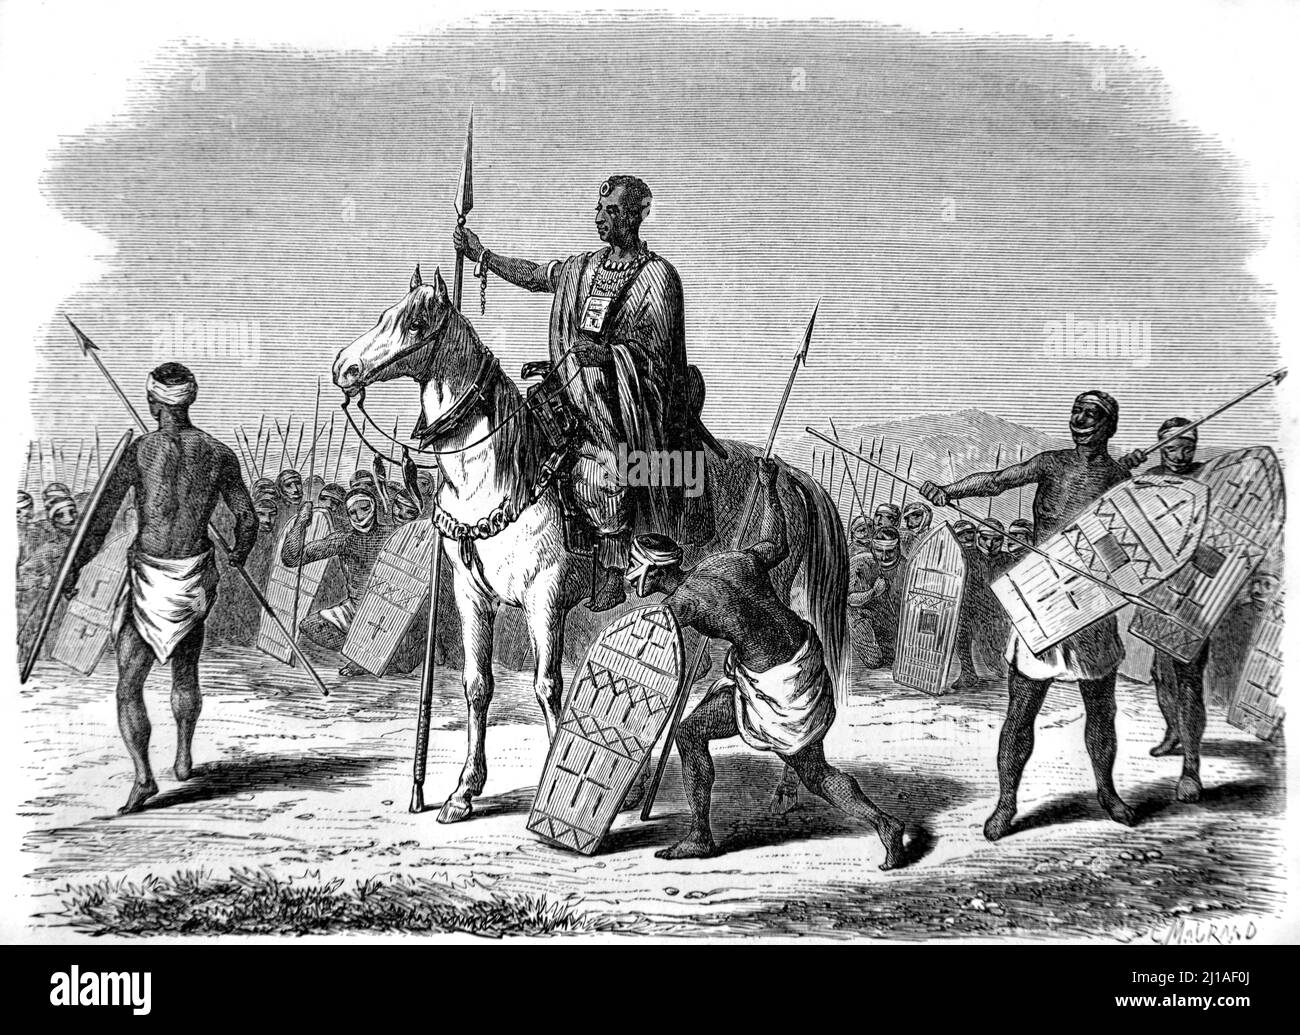 Kanembu Chief and Warriors or Soldiers with Spears and Shields during the Kanem-Bornu Empire in north-central Africa, now Chad, Africa. Illustration or Engraving 1860. Stock Photo